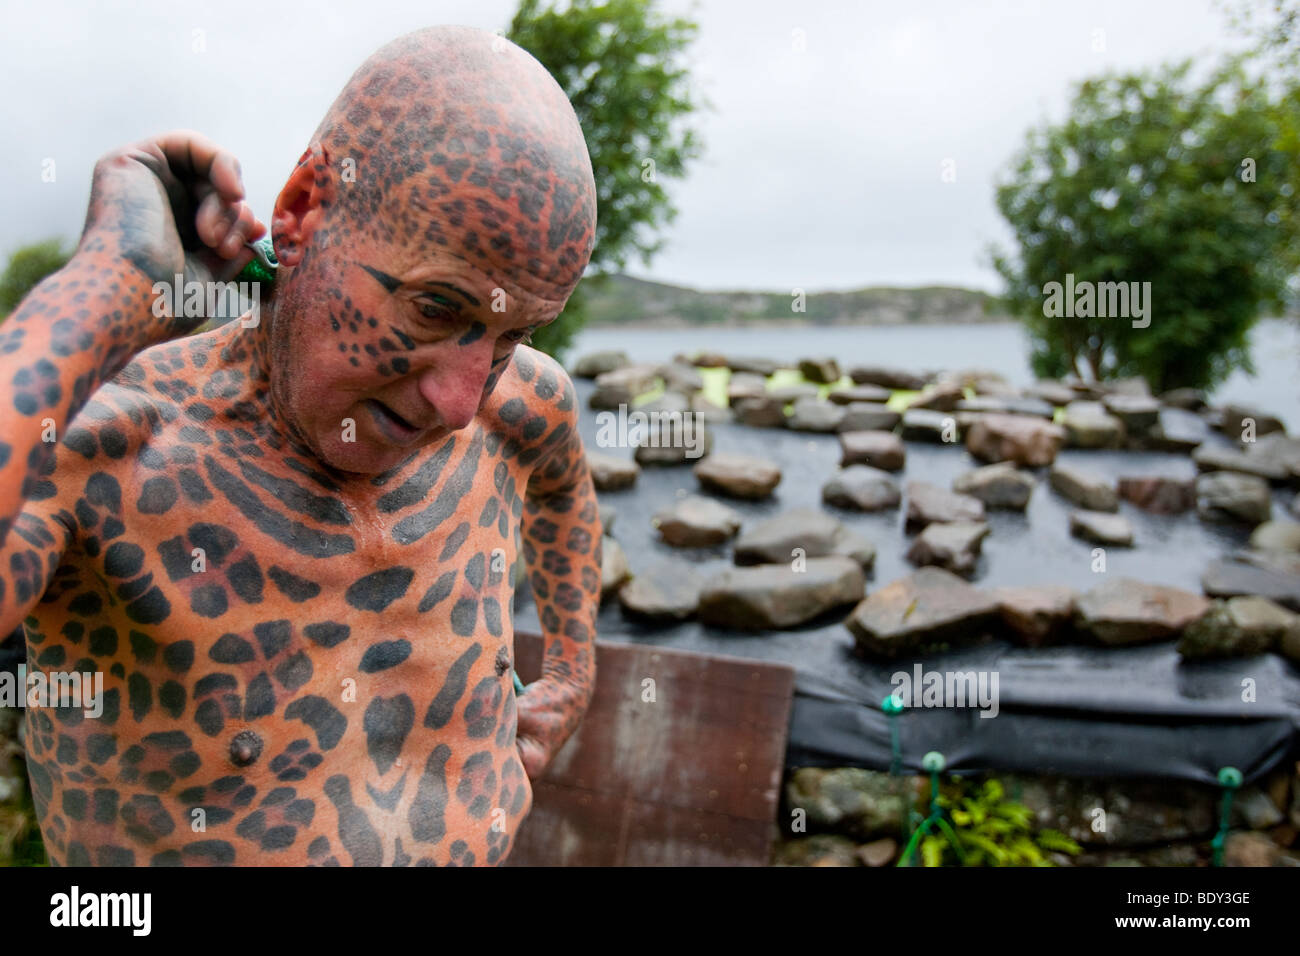 Tom Leppard The Leopard Man Of Skye Is A Hermit And The Worlds Most Tattooed Man With